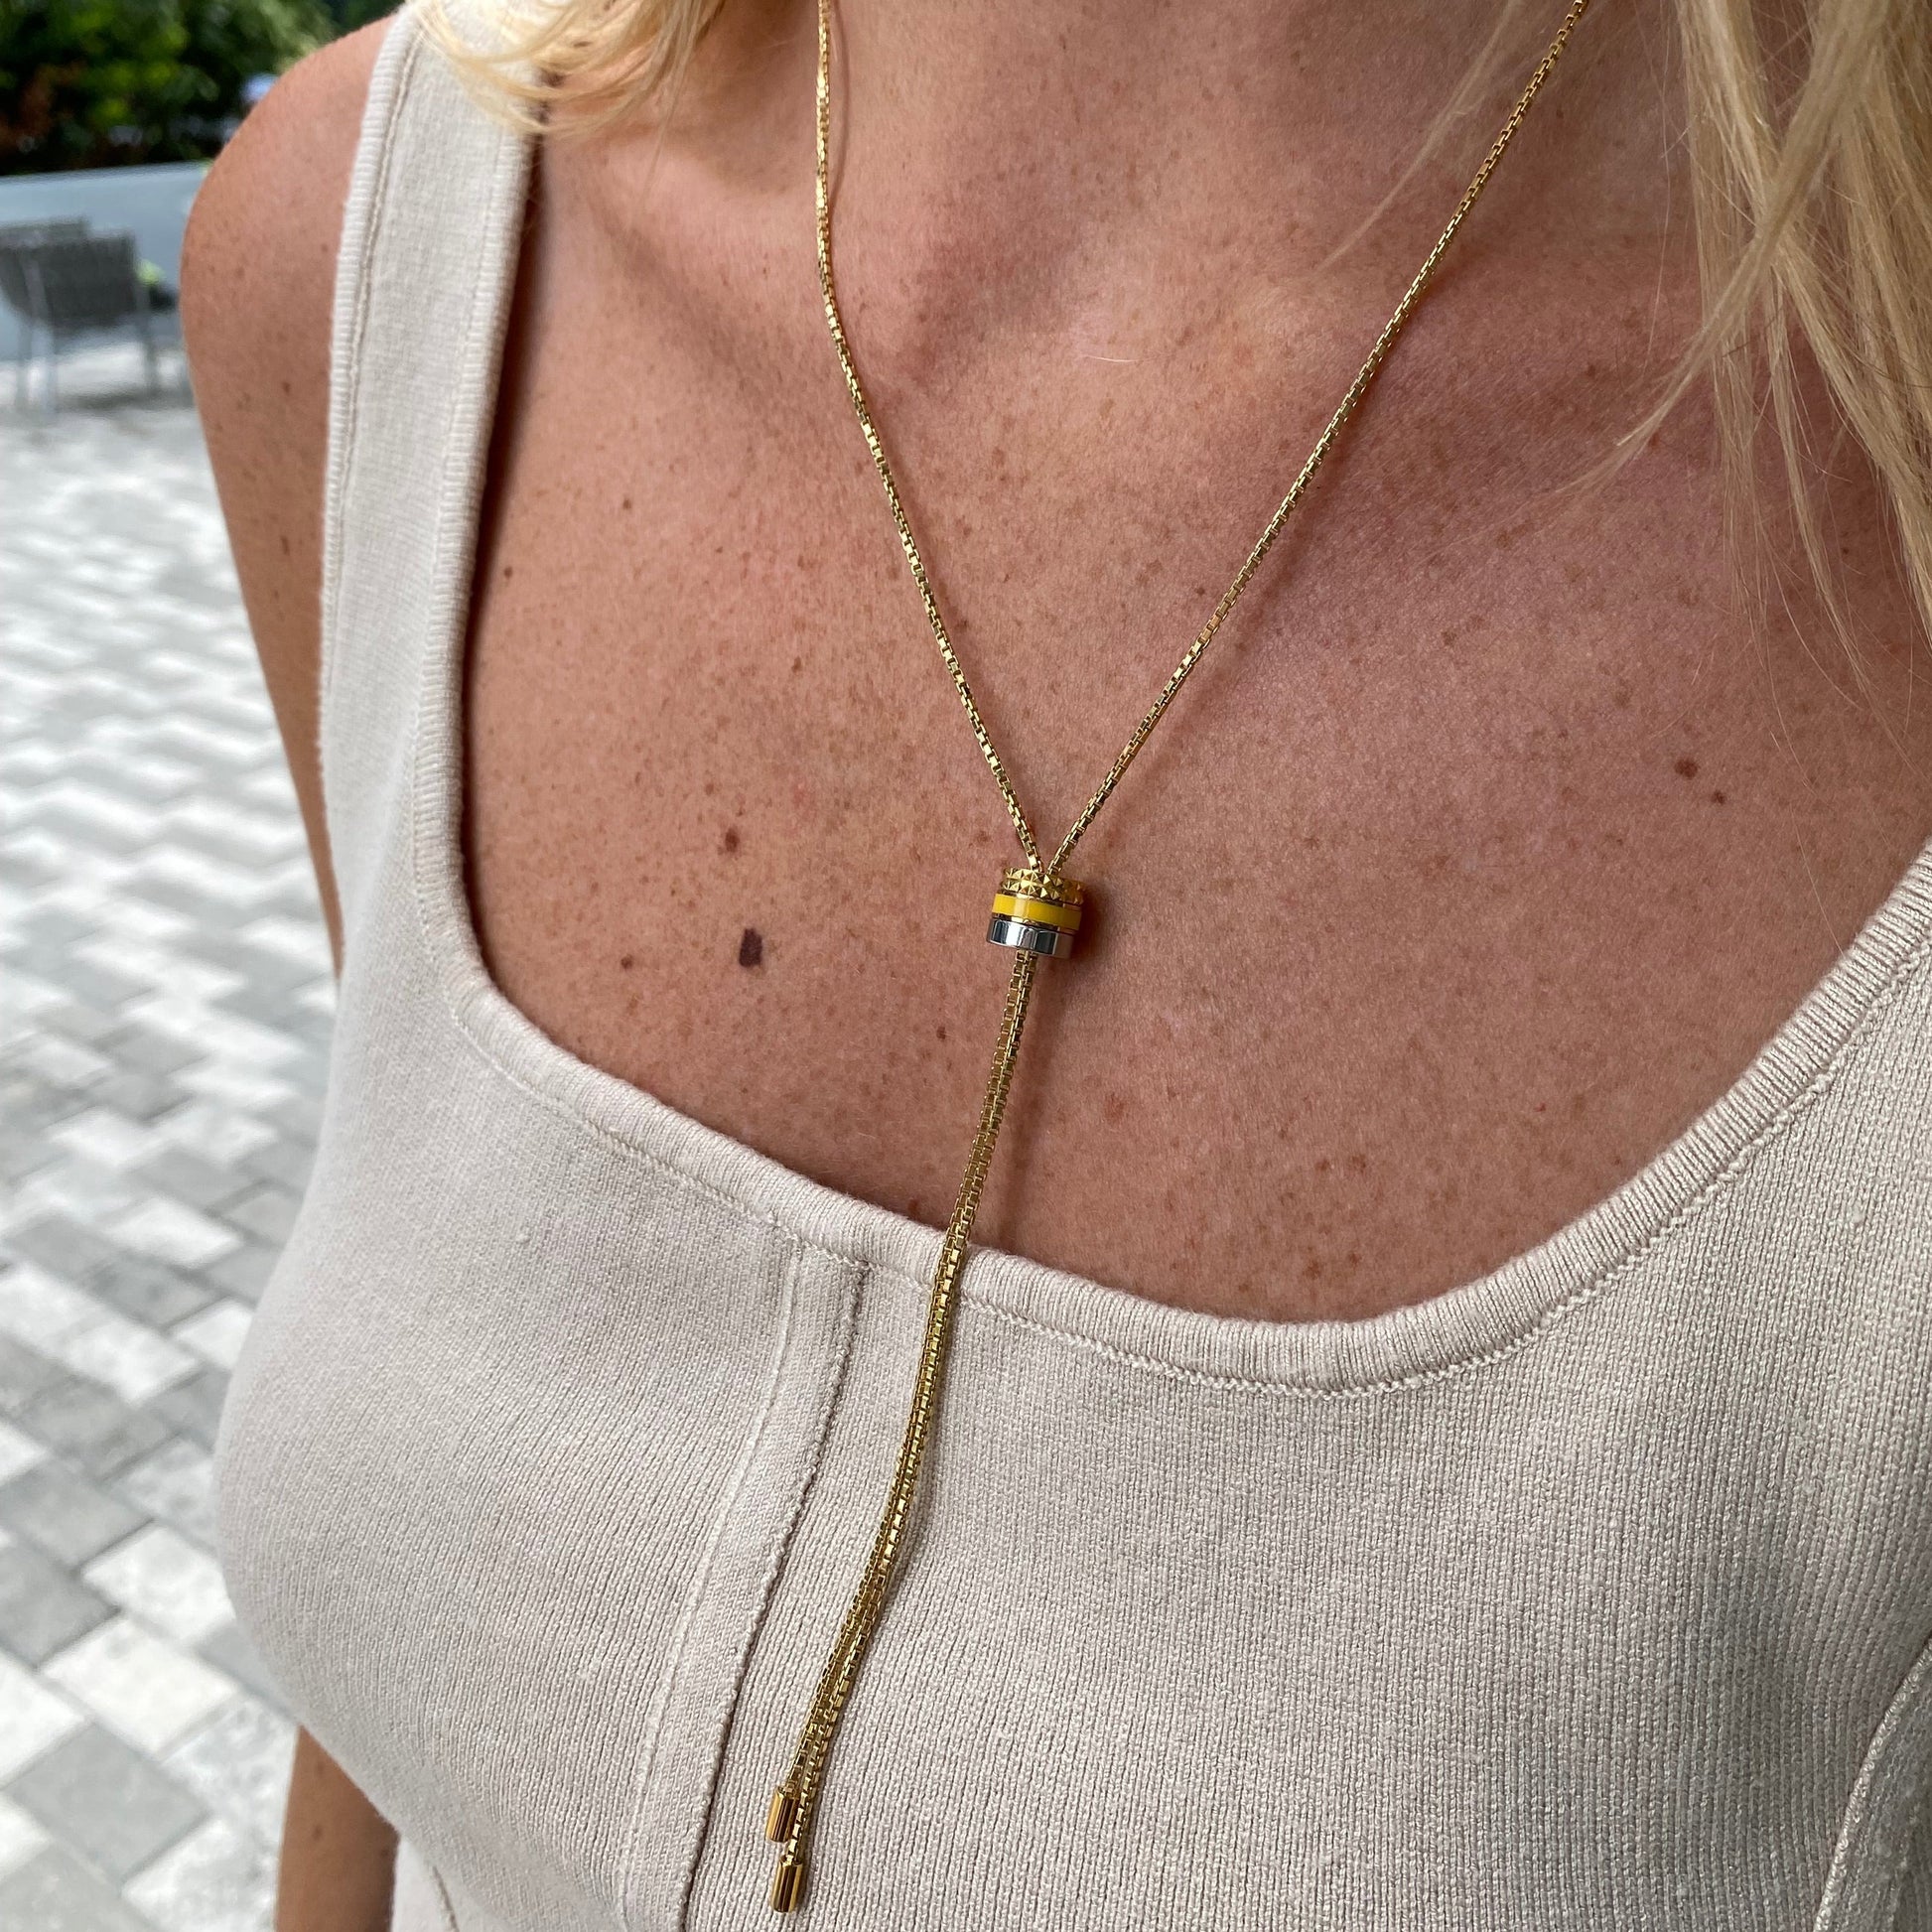 WEWA BOLO TIE TUBE SPECTRA YELLOW CHIP NECKLACE